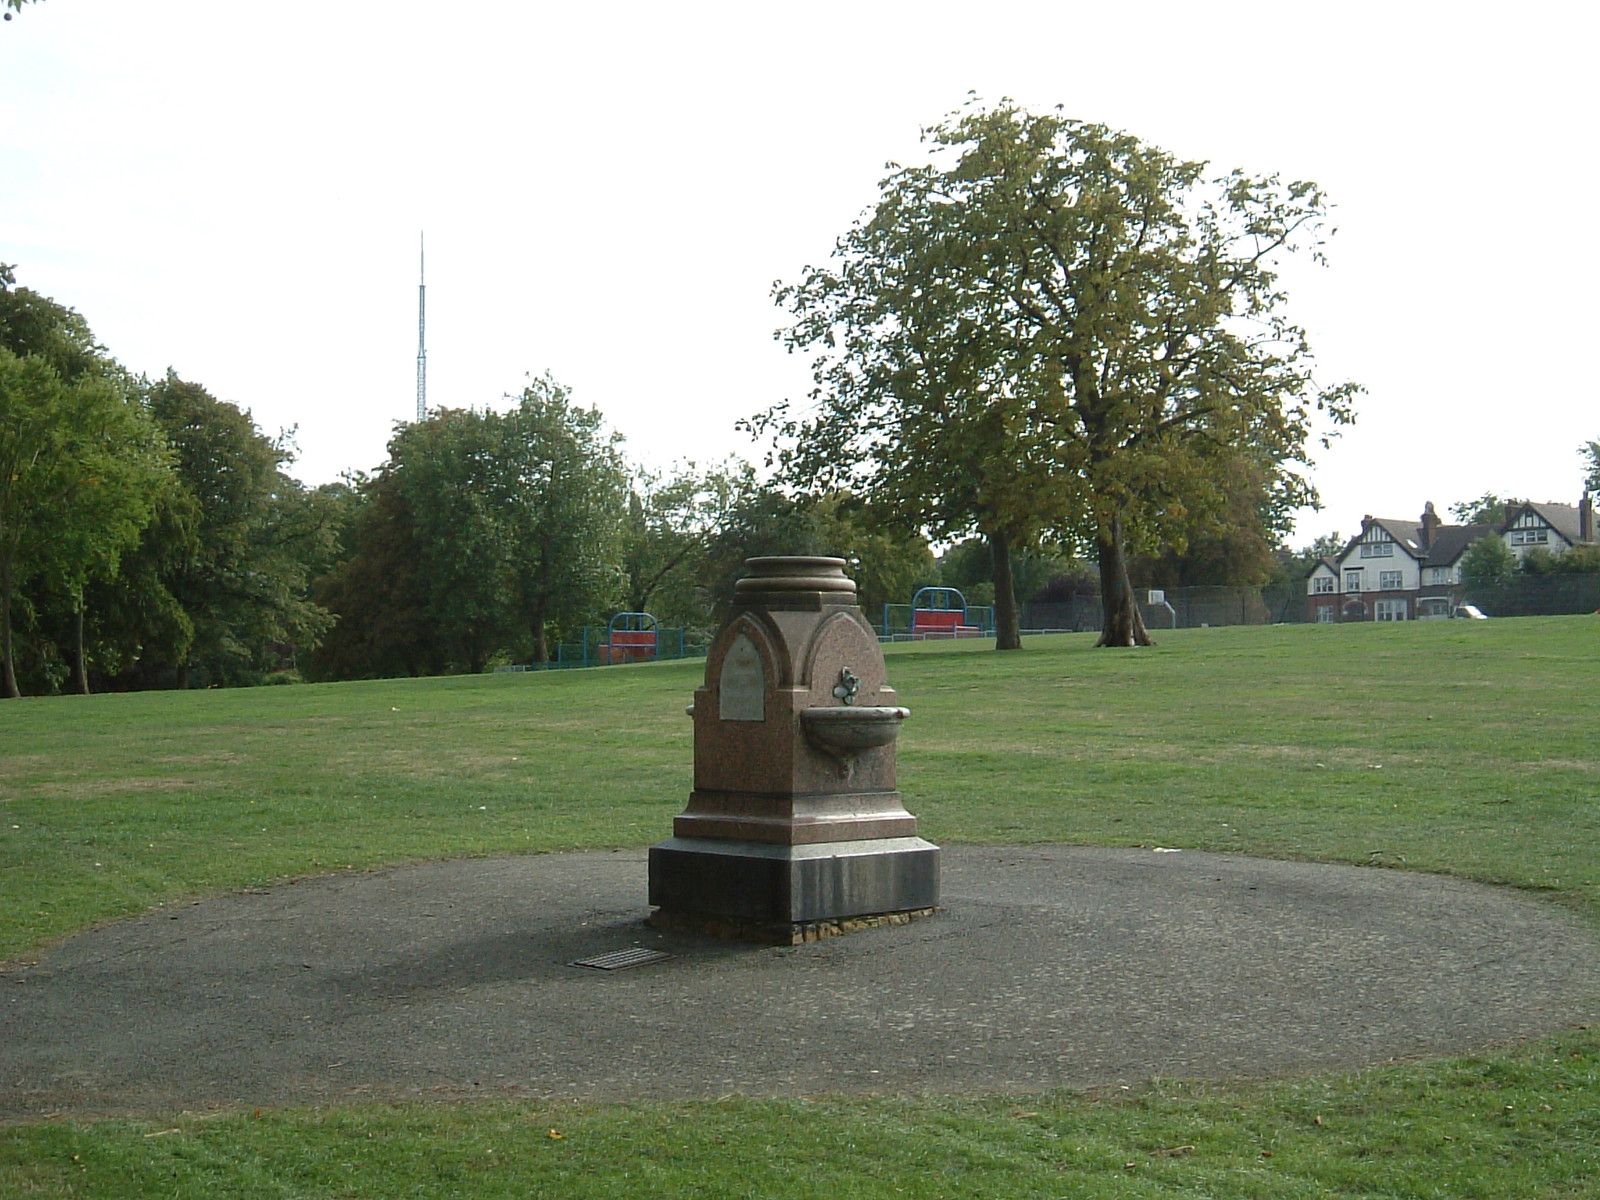 An 1891 drinking fountain in Upper Norwood Recreation Ground